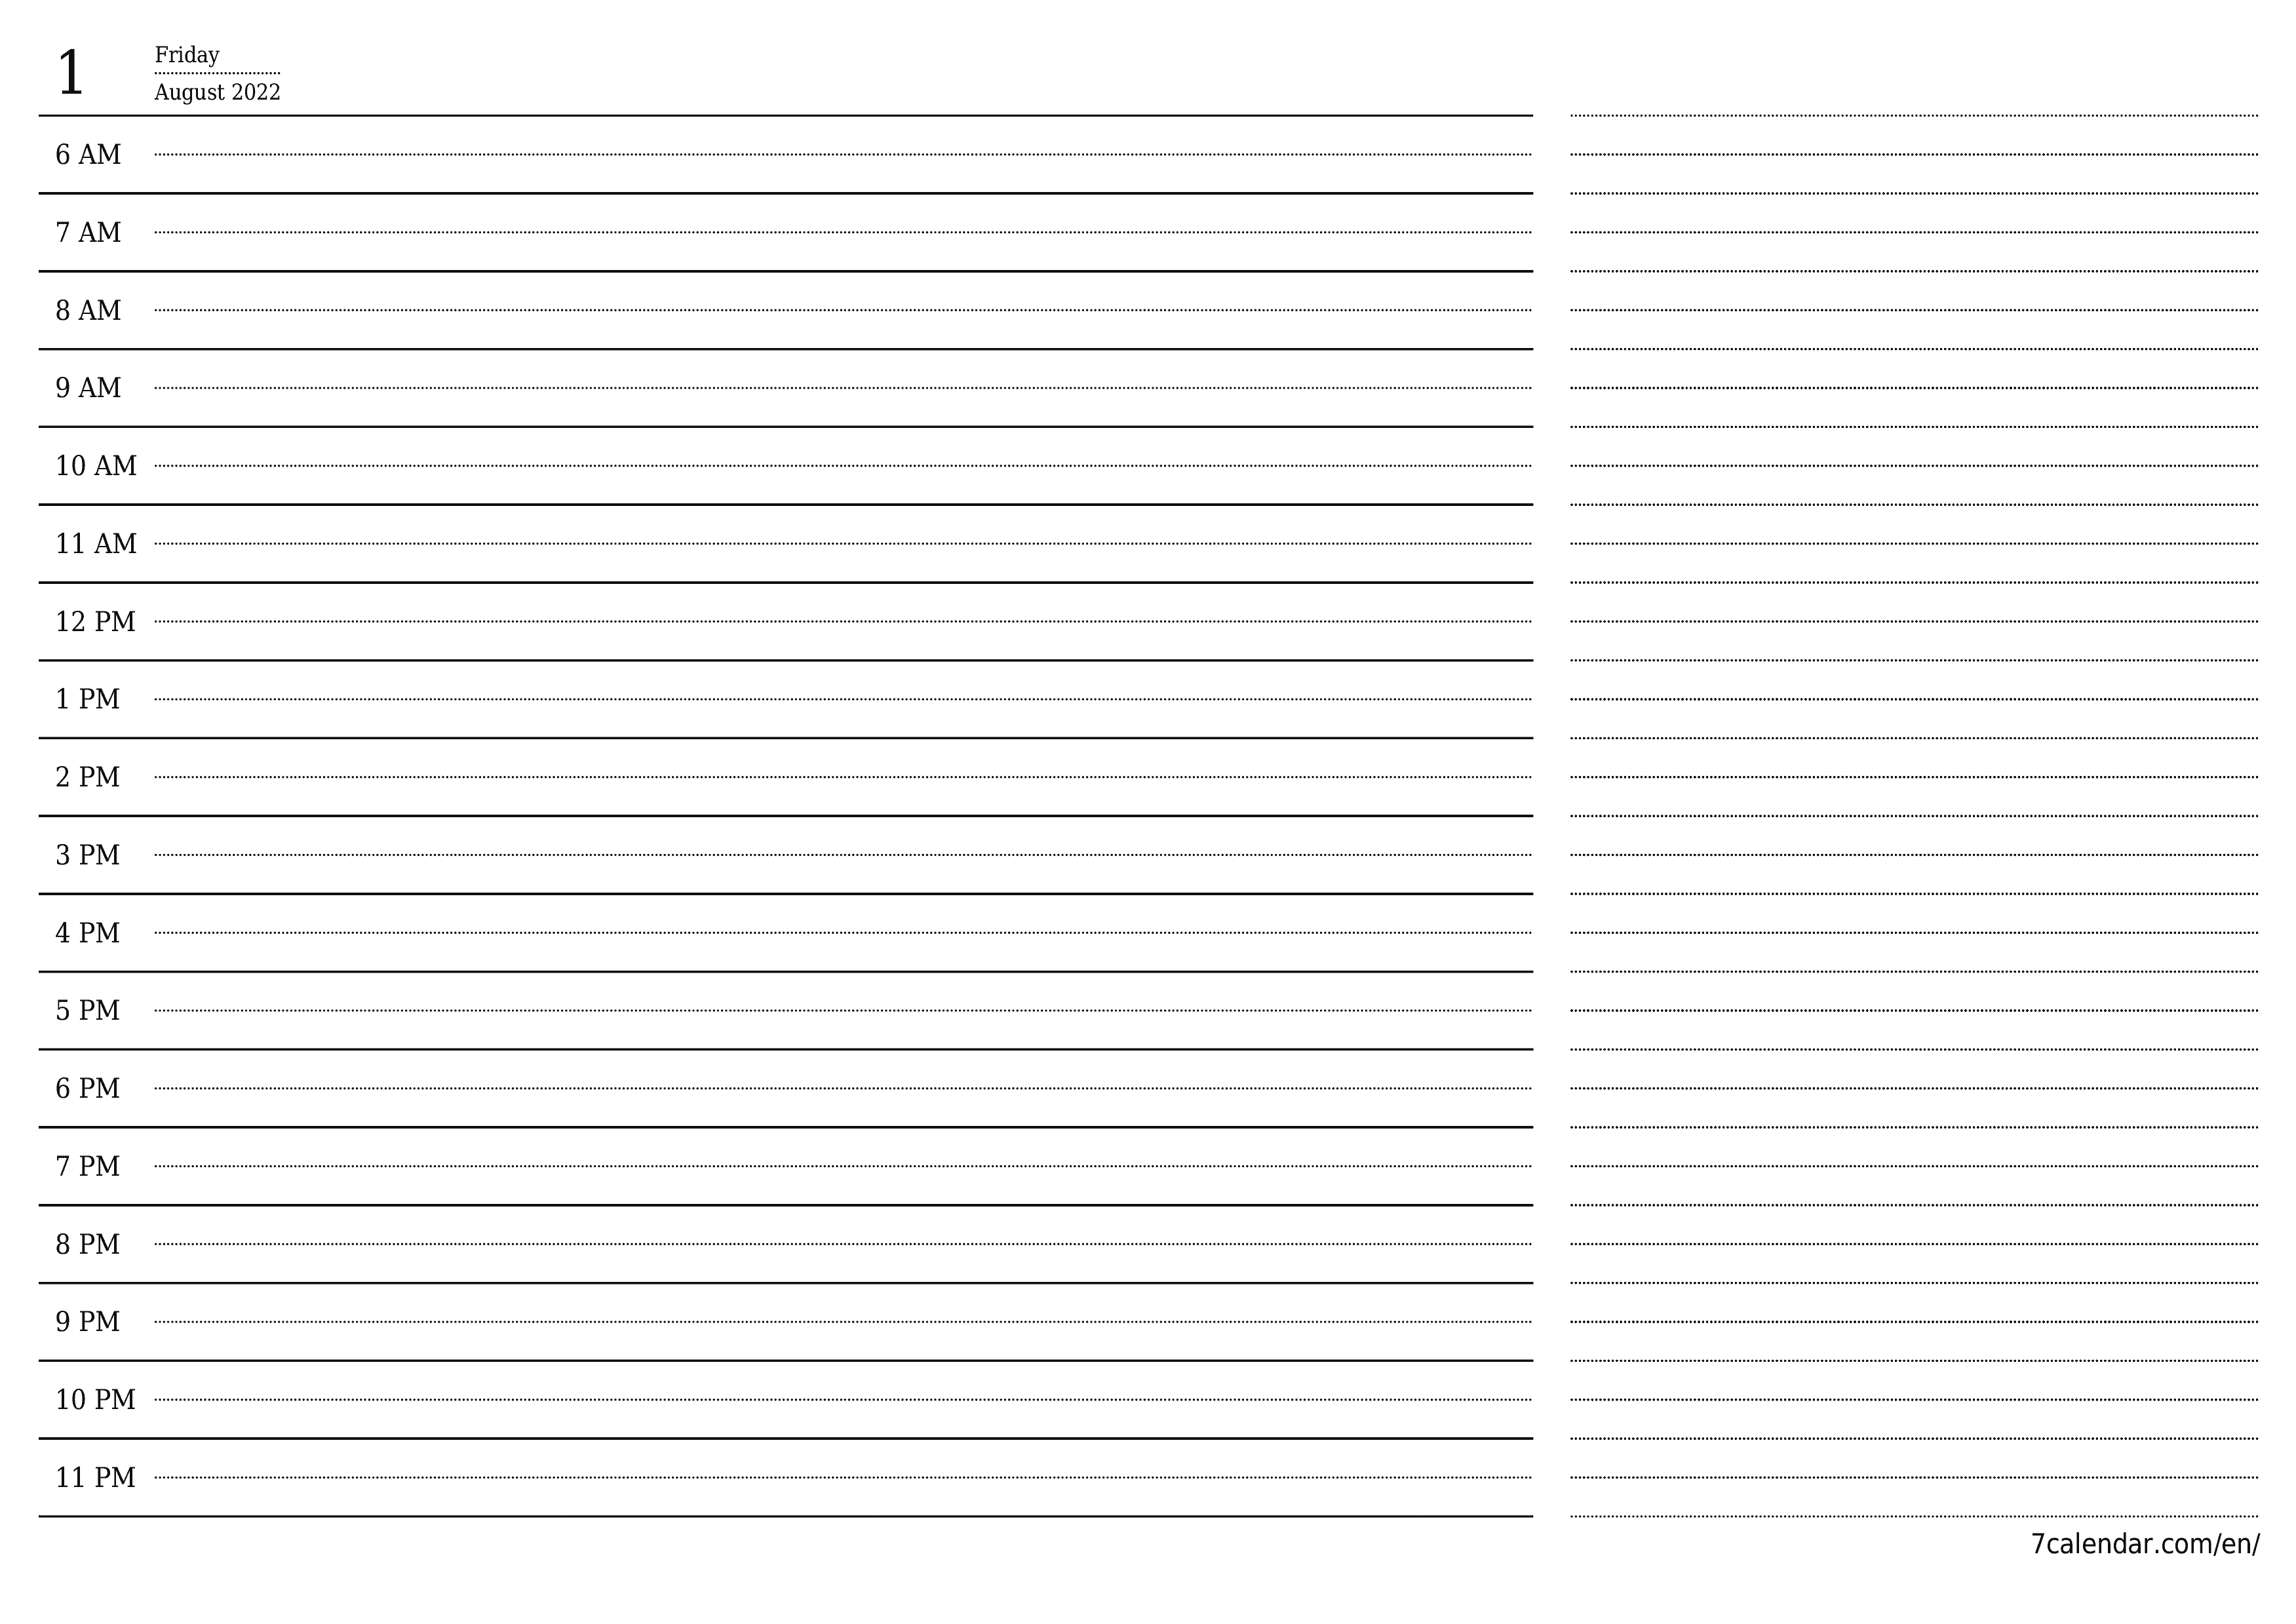 Blank daily printable calendar and planner for day August 2022 with notes, save and print to PDF PNG English - 7calendar.com